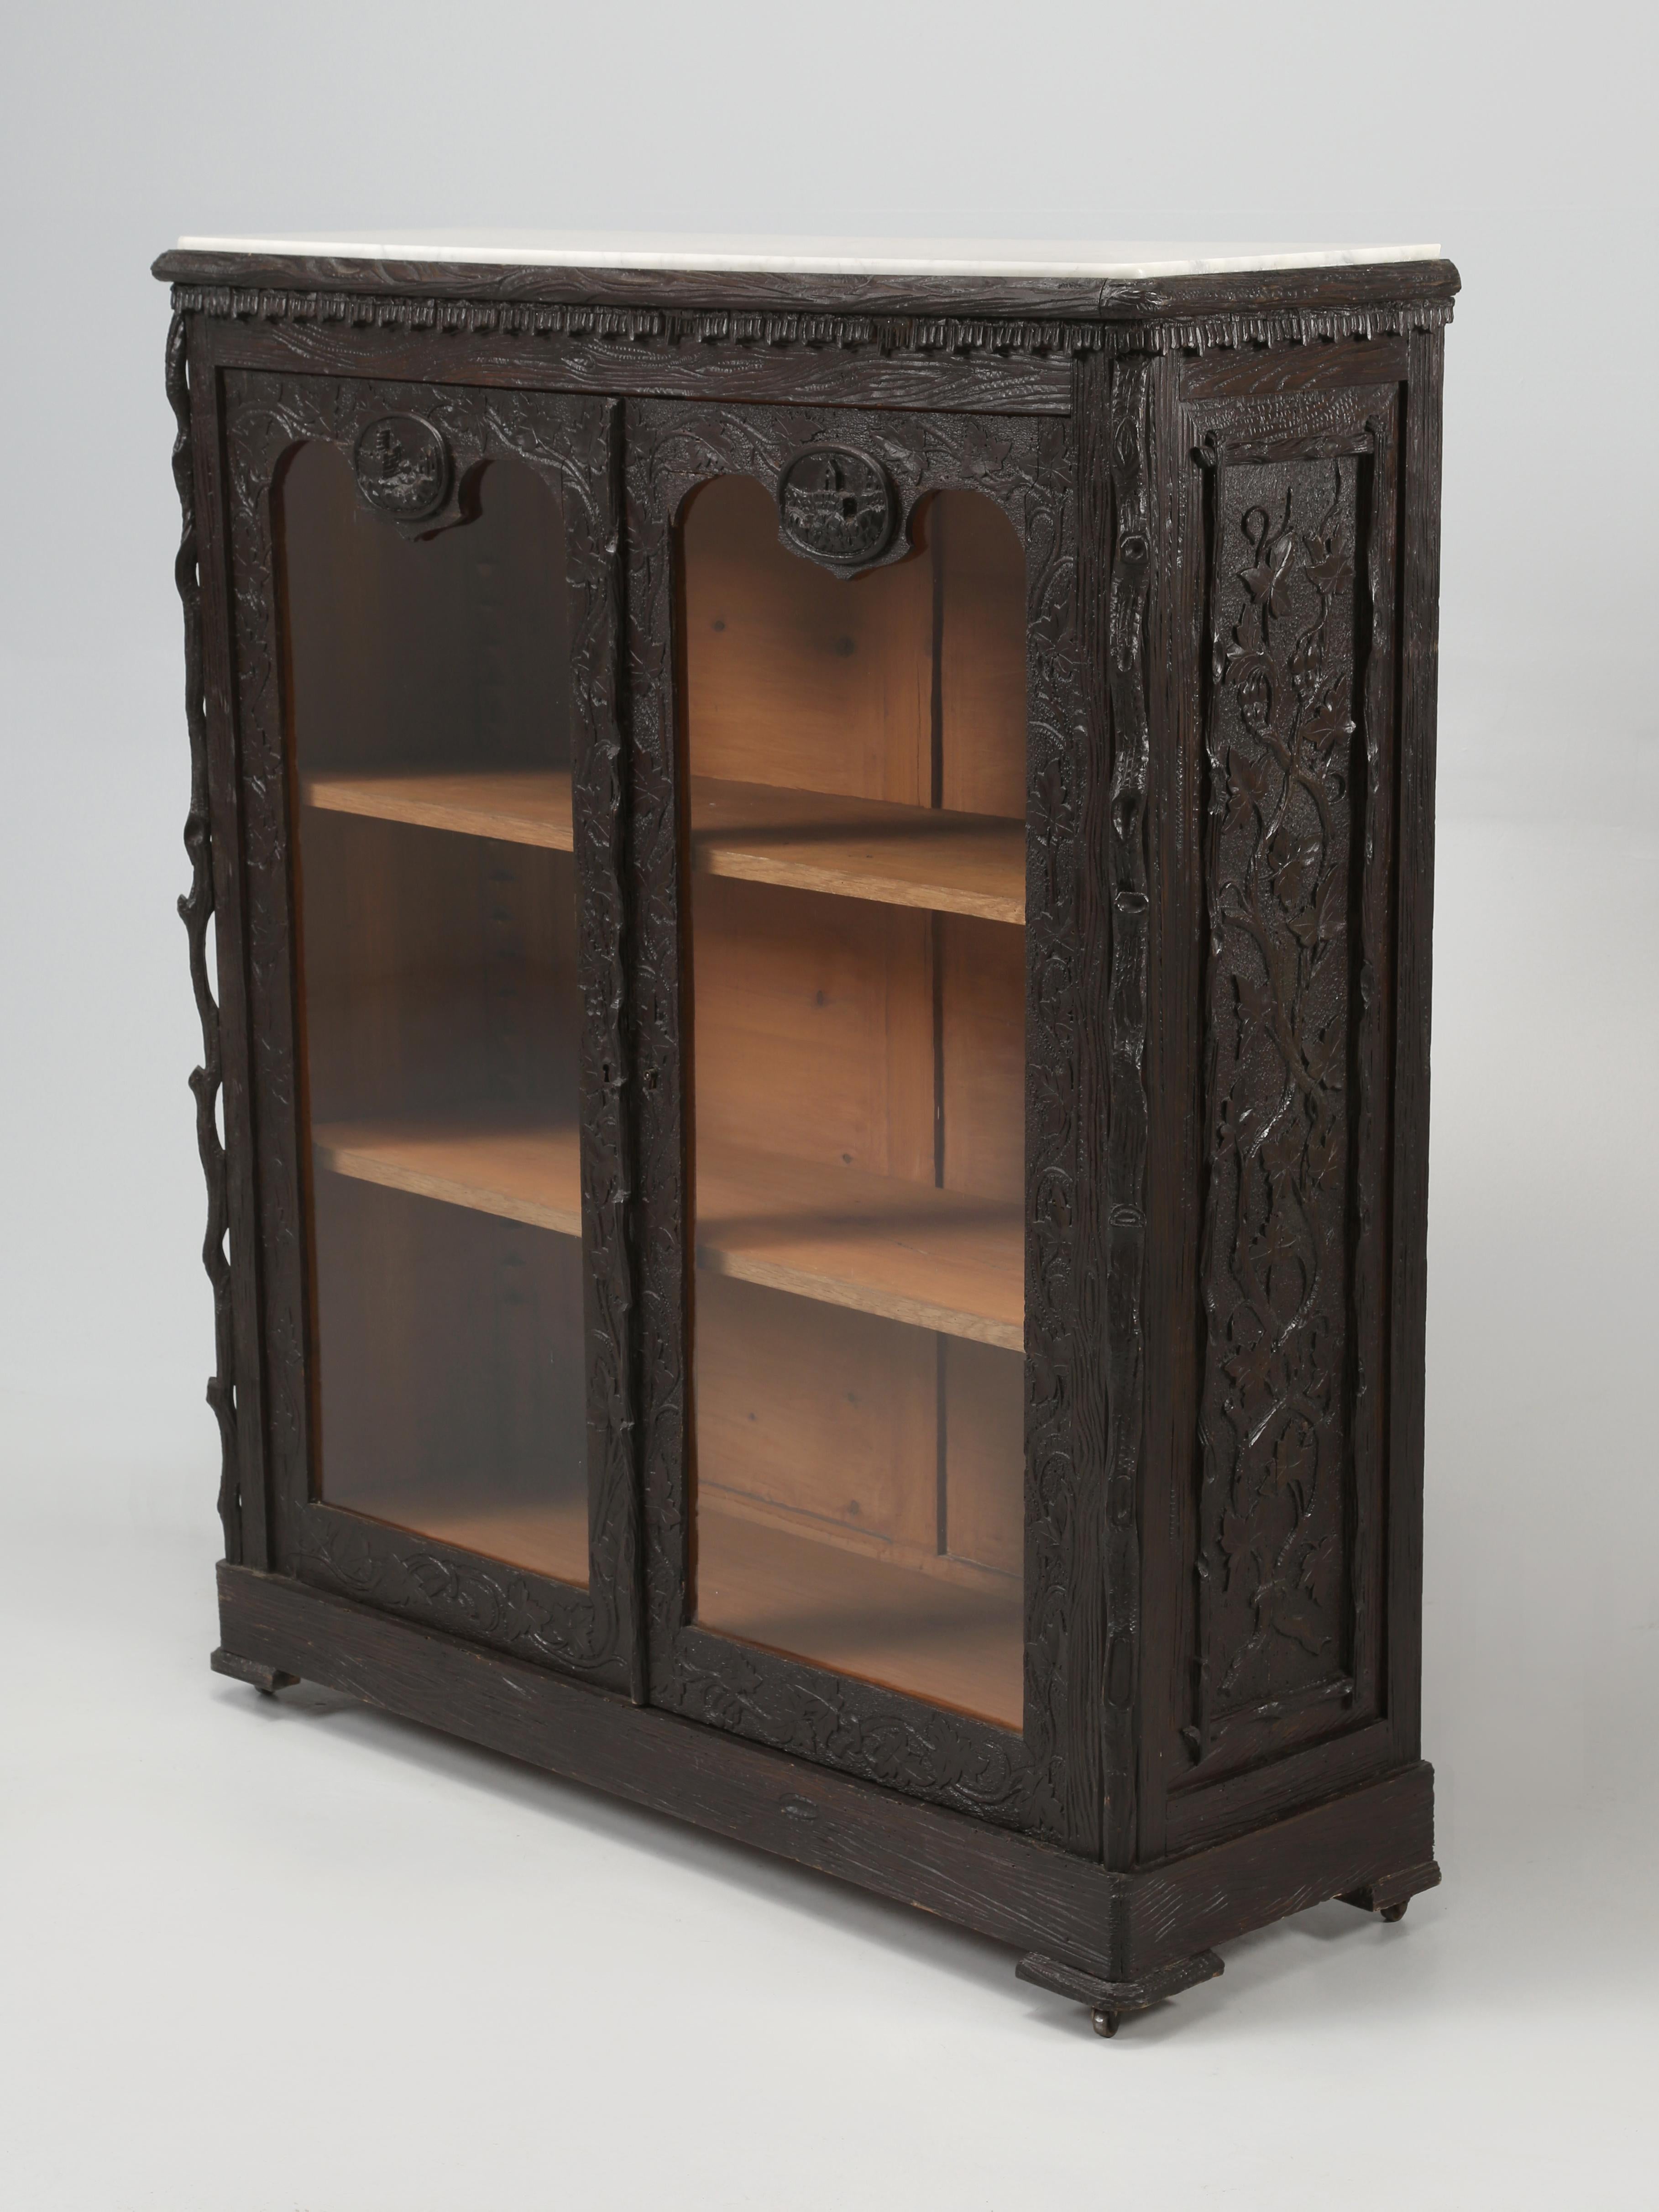 Black Forest bookcase, that was part of a major collection of Black Forest items sold by a Chateau outside of Marseille, France. There is a total of (42) antique Black Forest items that we have imported from the chateau and all will be listed on